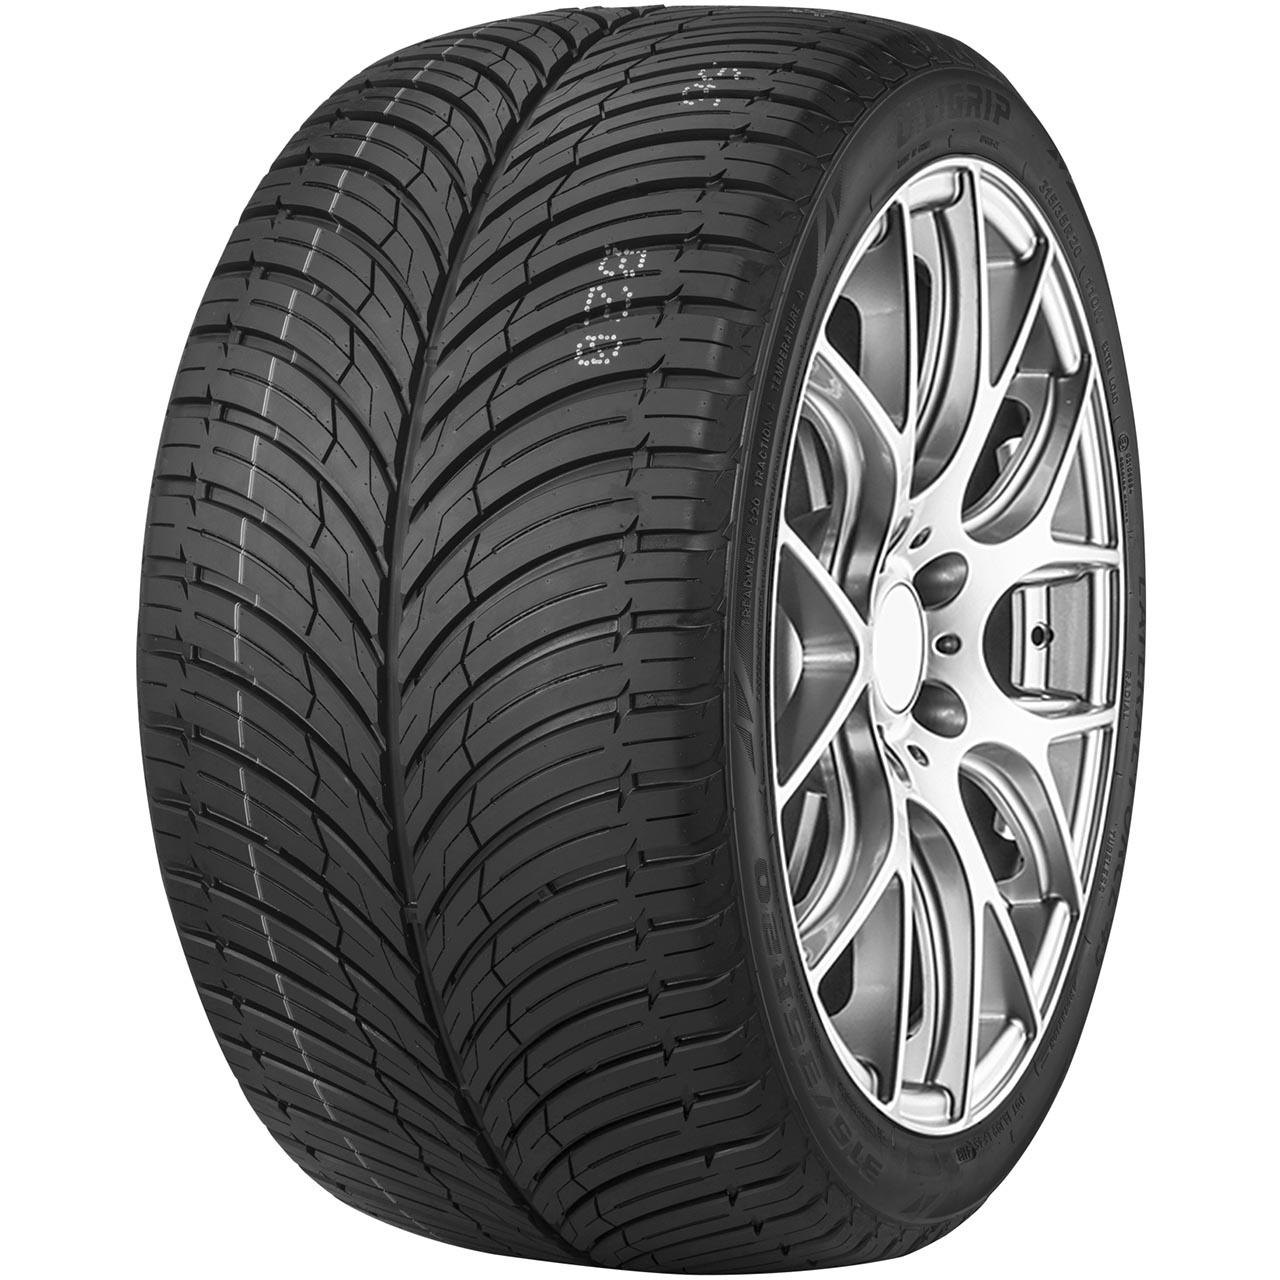 Unigrip Lateral Force 4S 235/55R19 105W XL